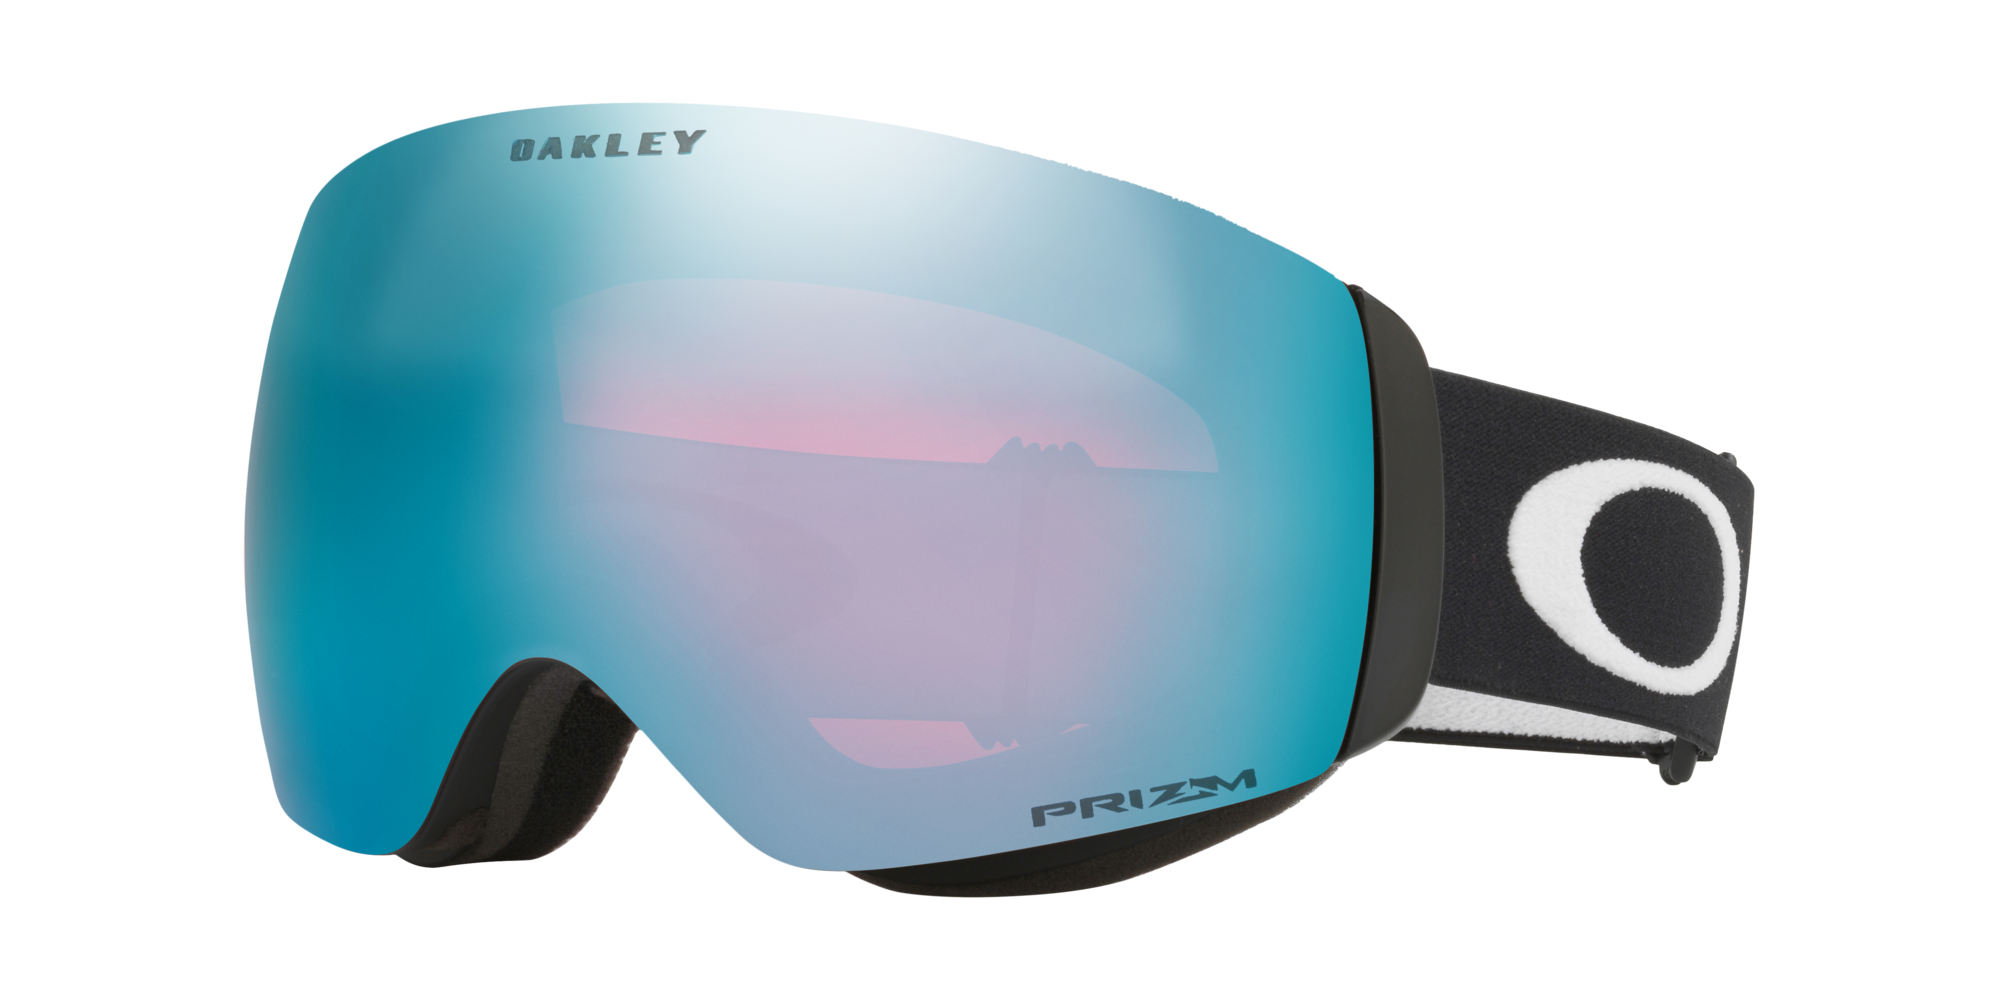 can i buy an oakley gift card online